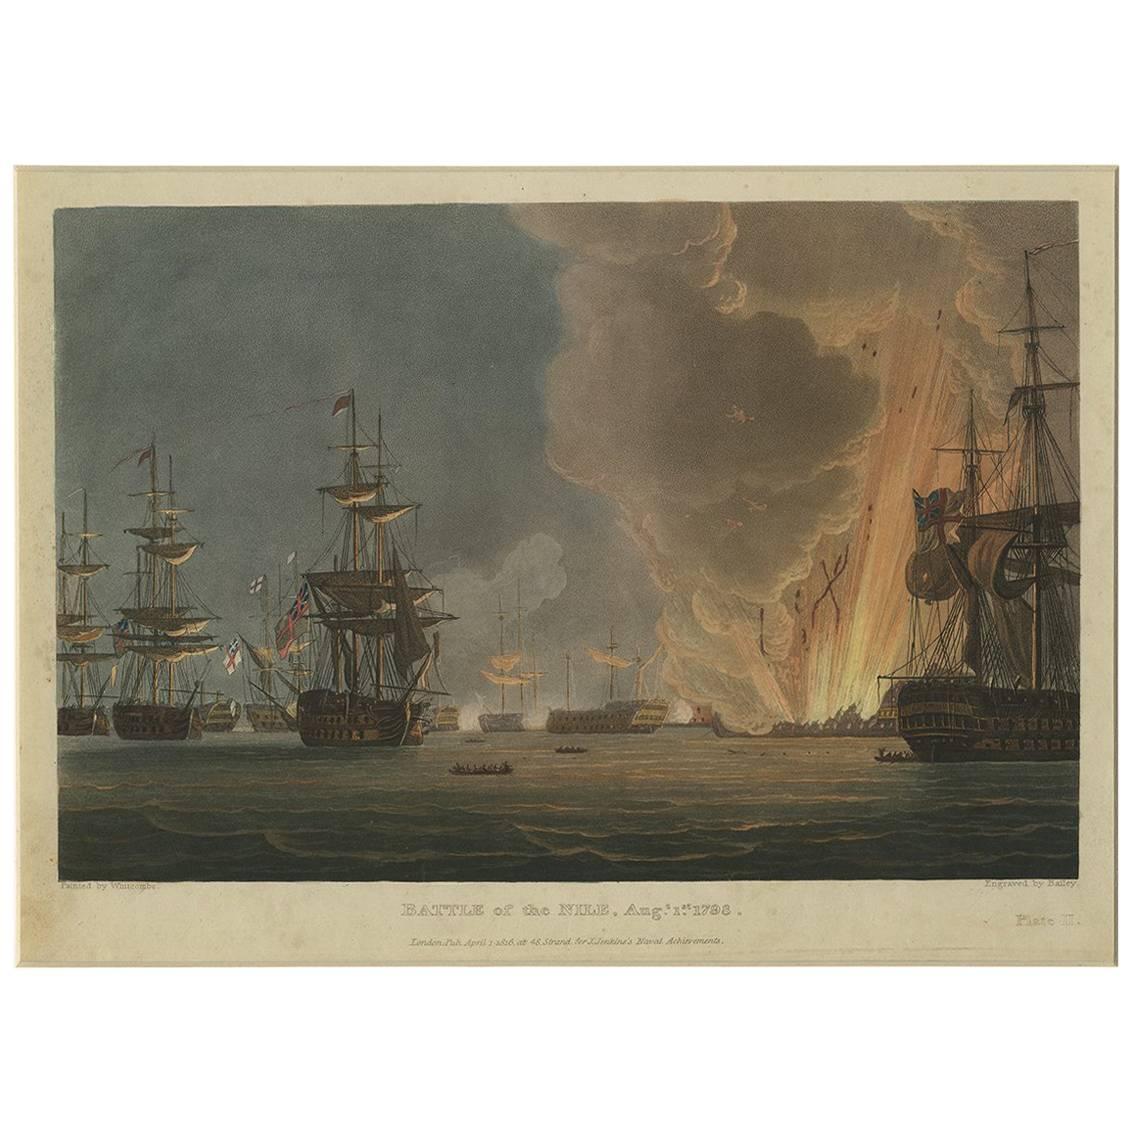 Antique Print of the Battle of the Nile by Bailey '1816'